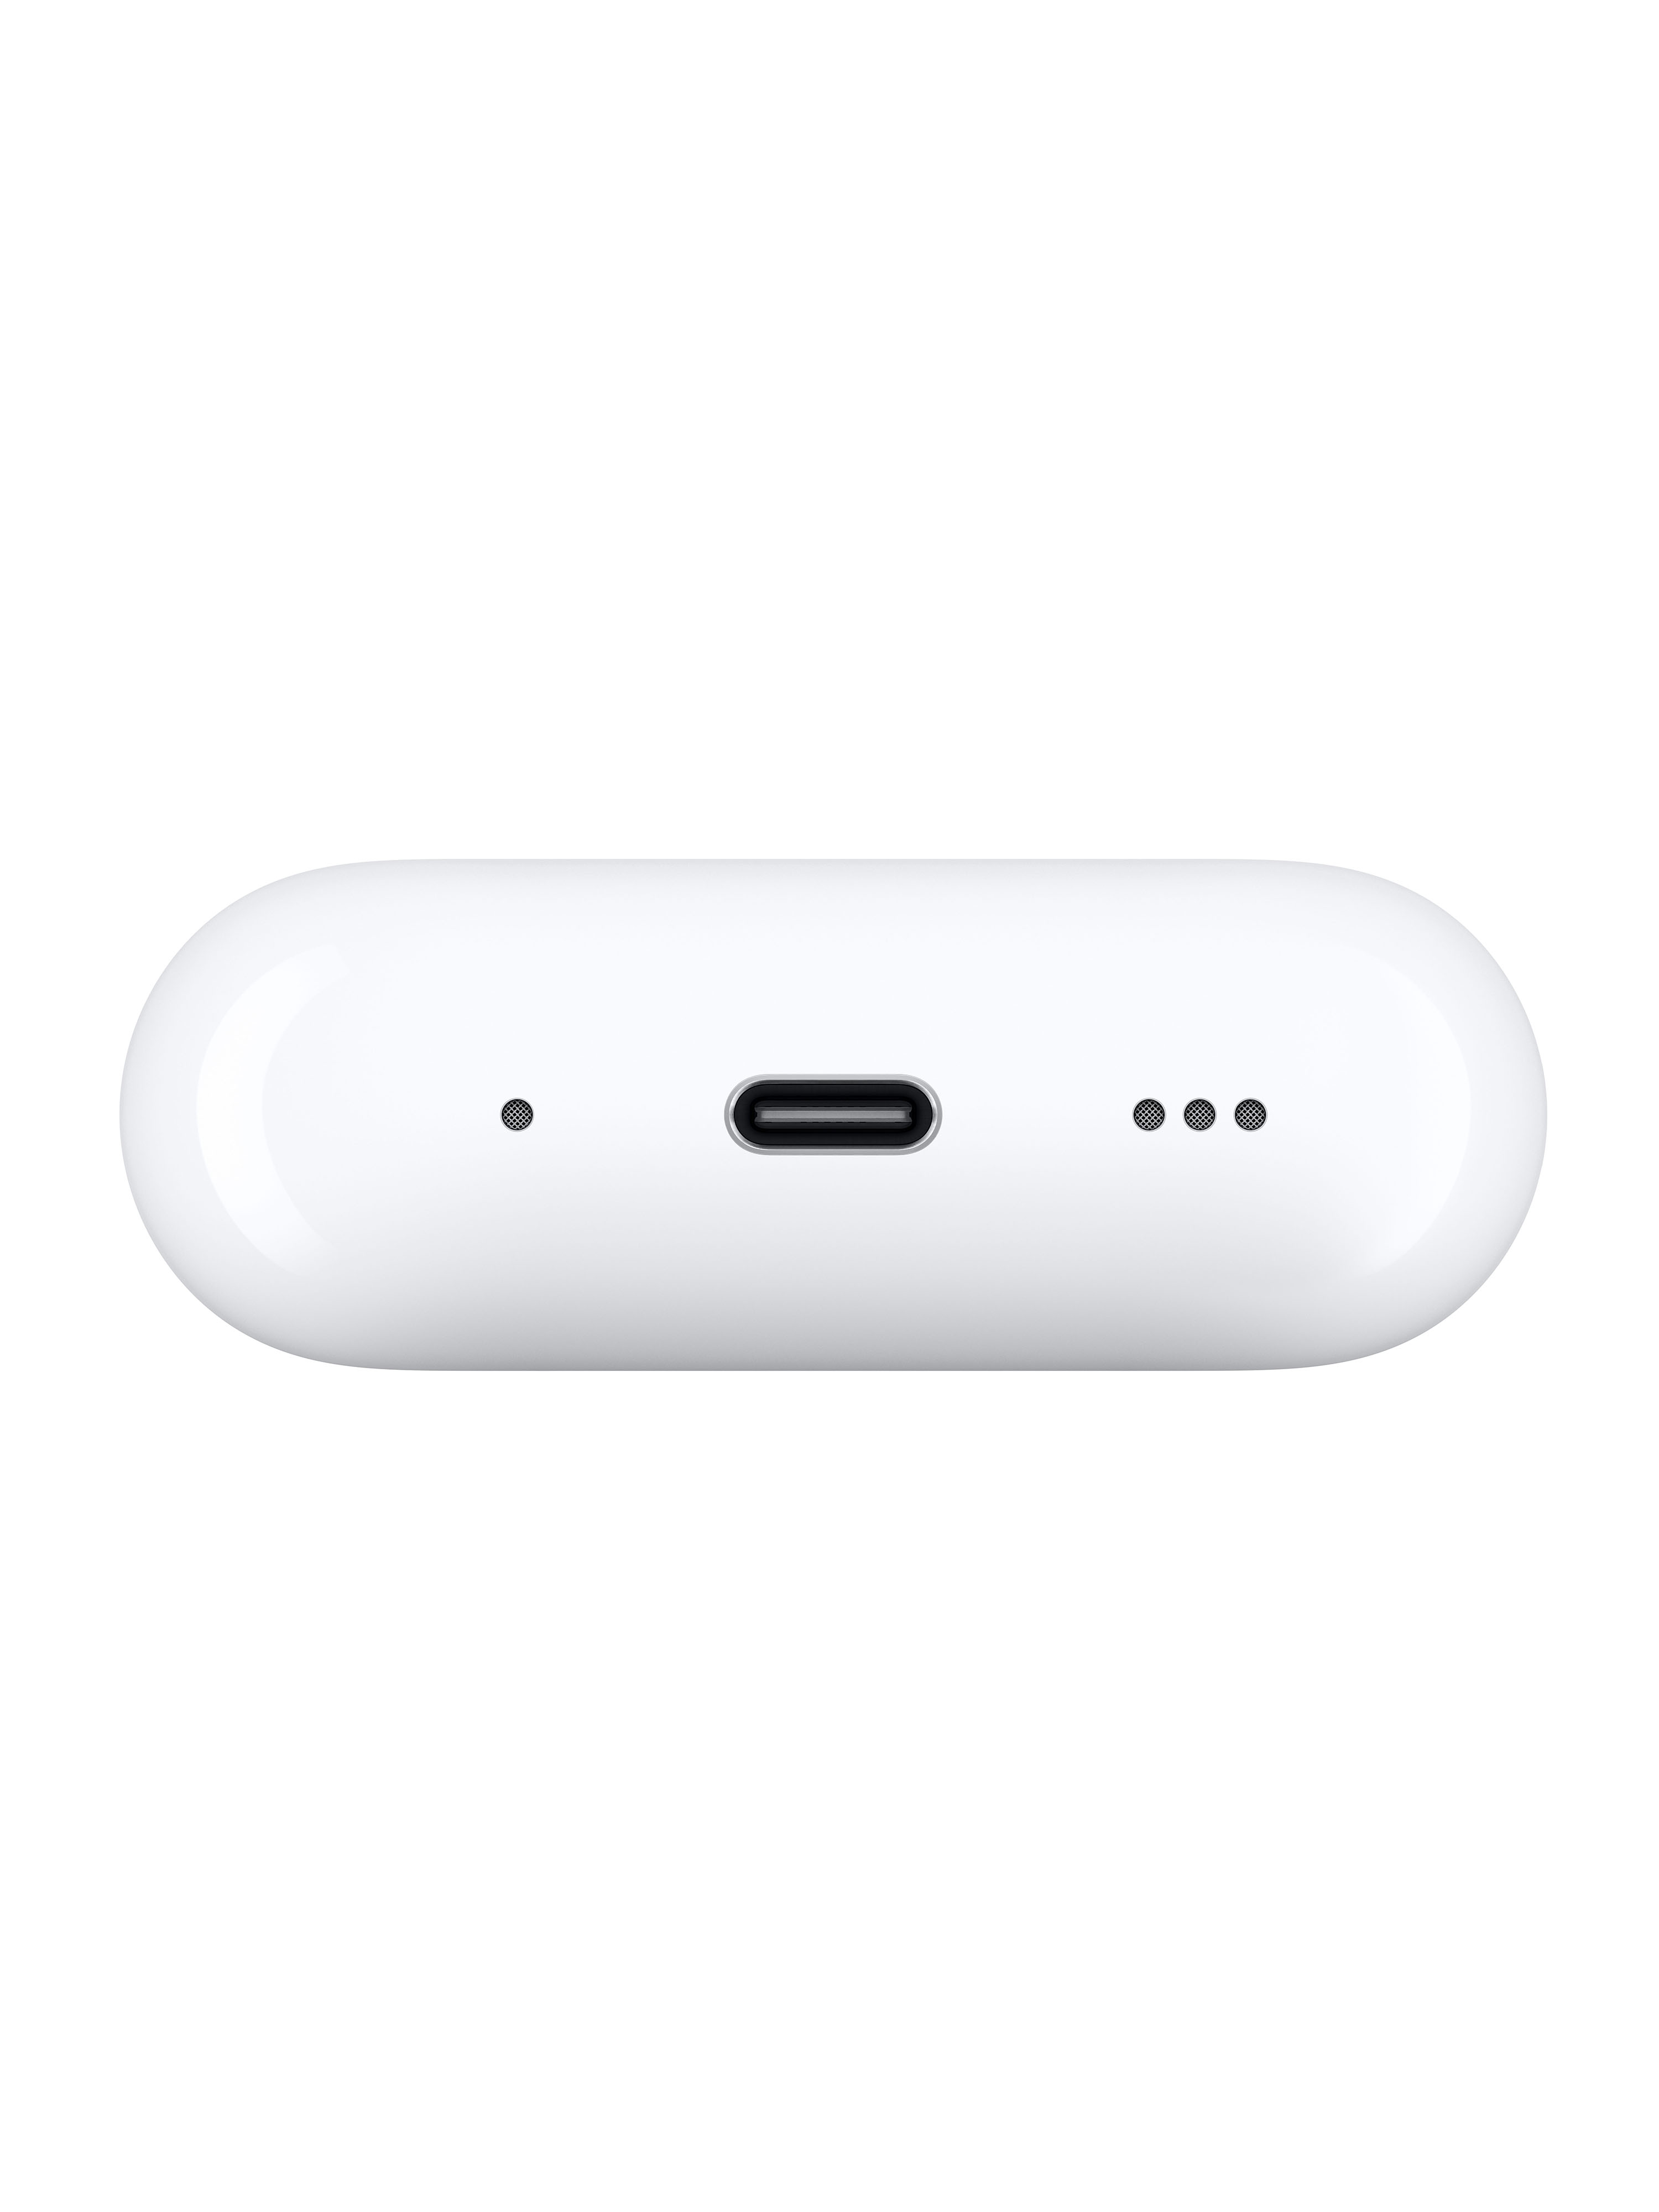 AirPods Pro (2nd generation) with MagSafe Charging